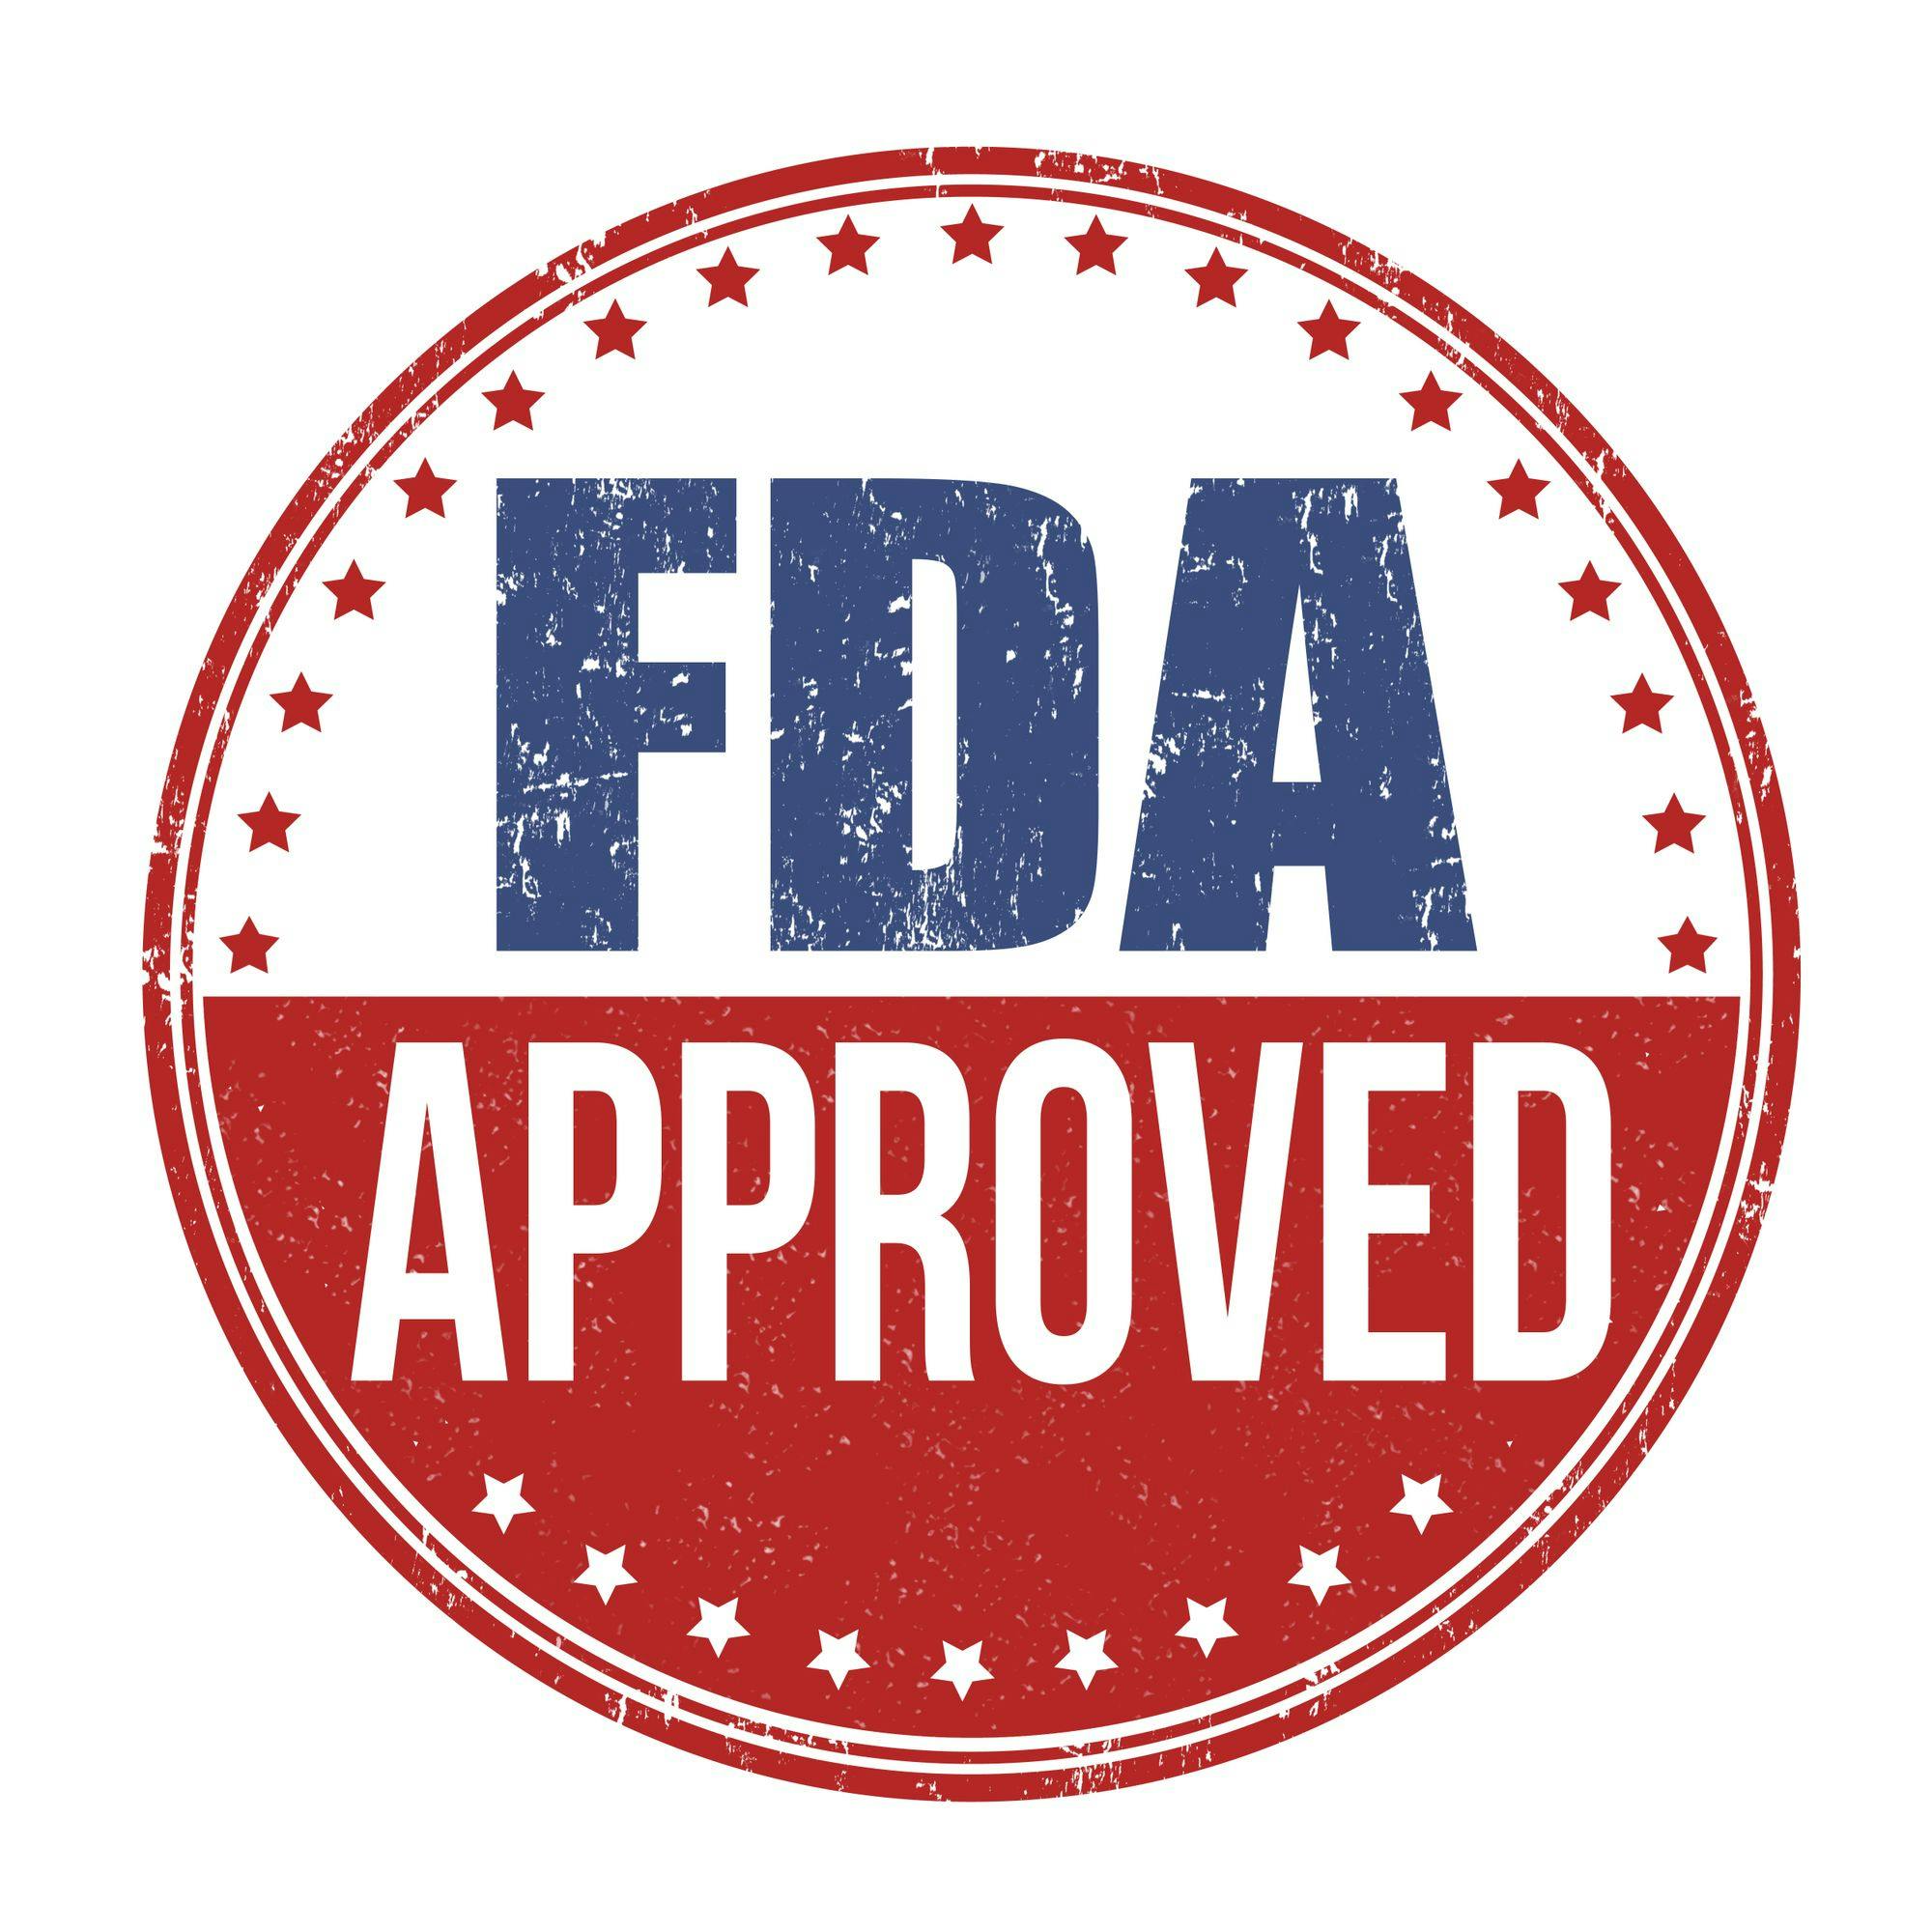 FDA Grants Breakthrough Therapy Designations to Trastuzumab Deruxtecan for HER2+ Solid Tumors, Including mCRC